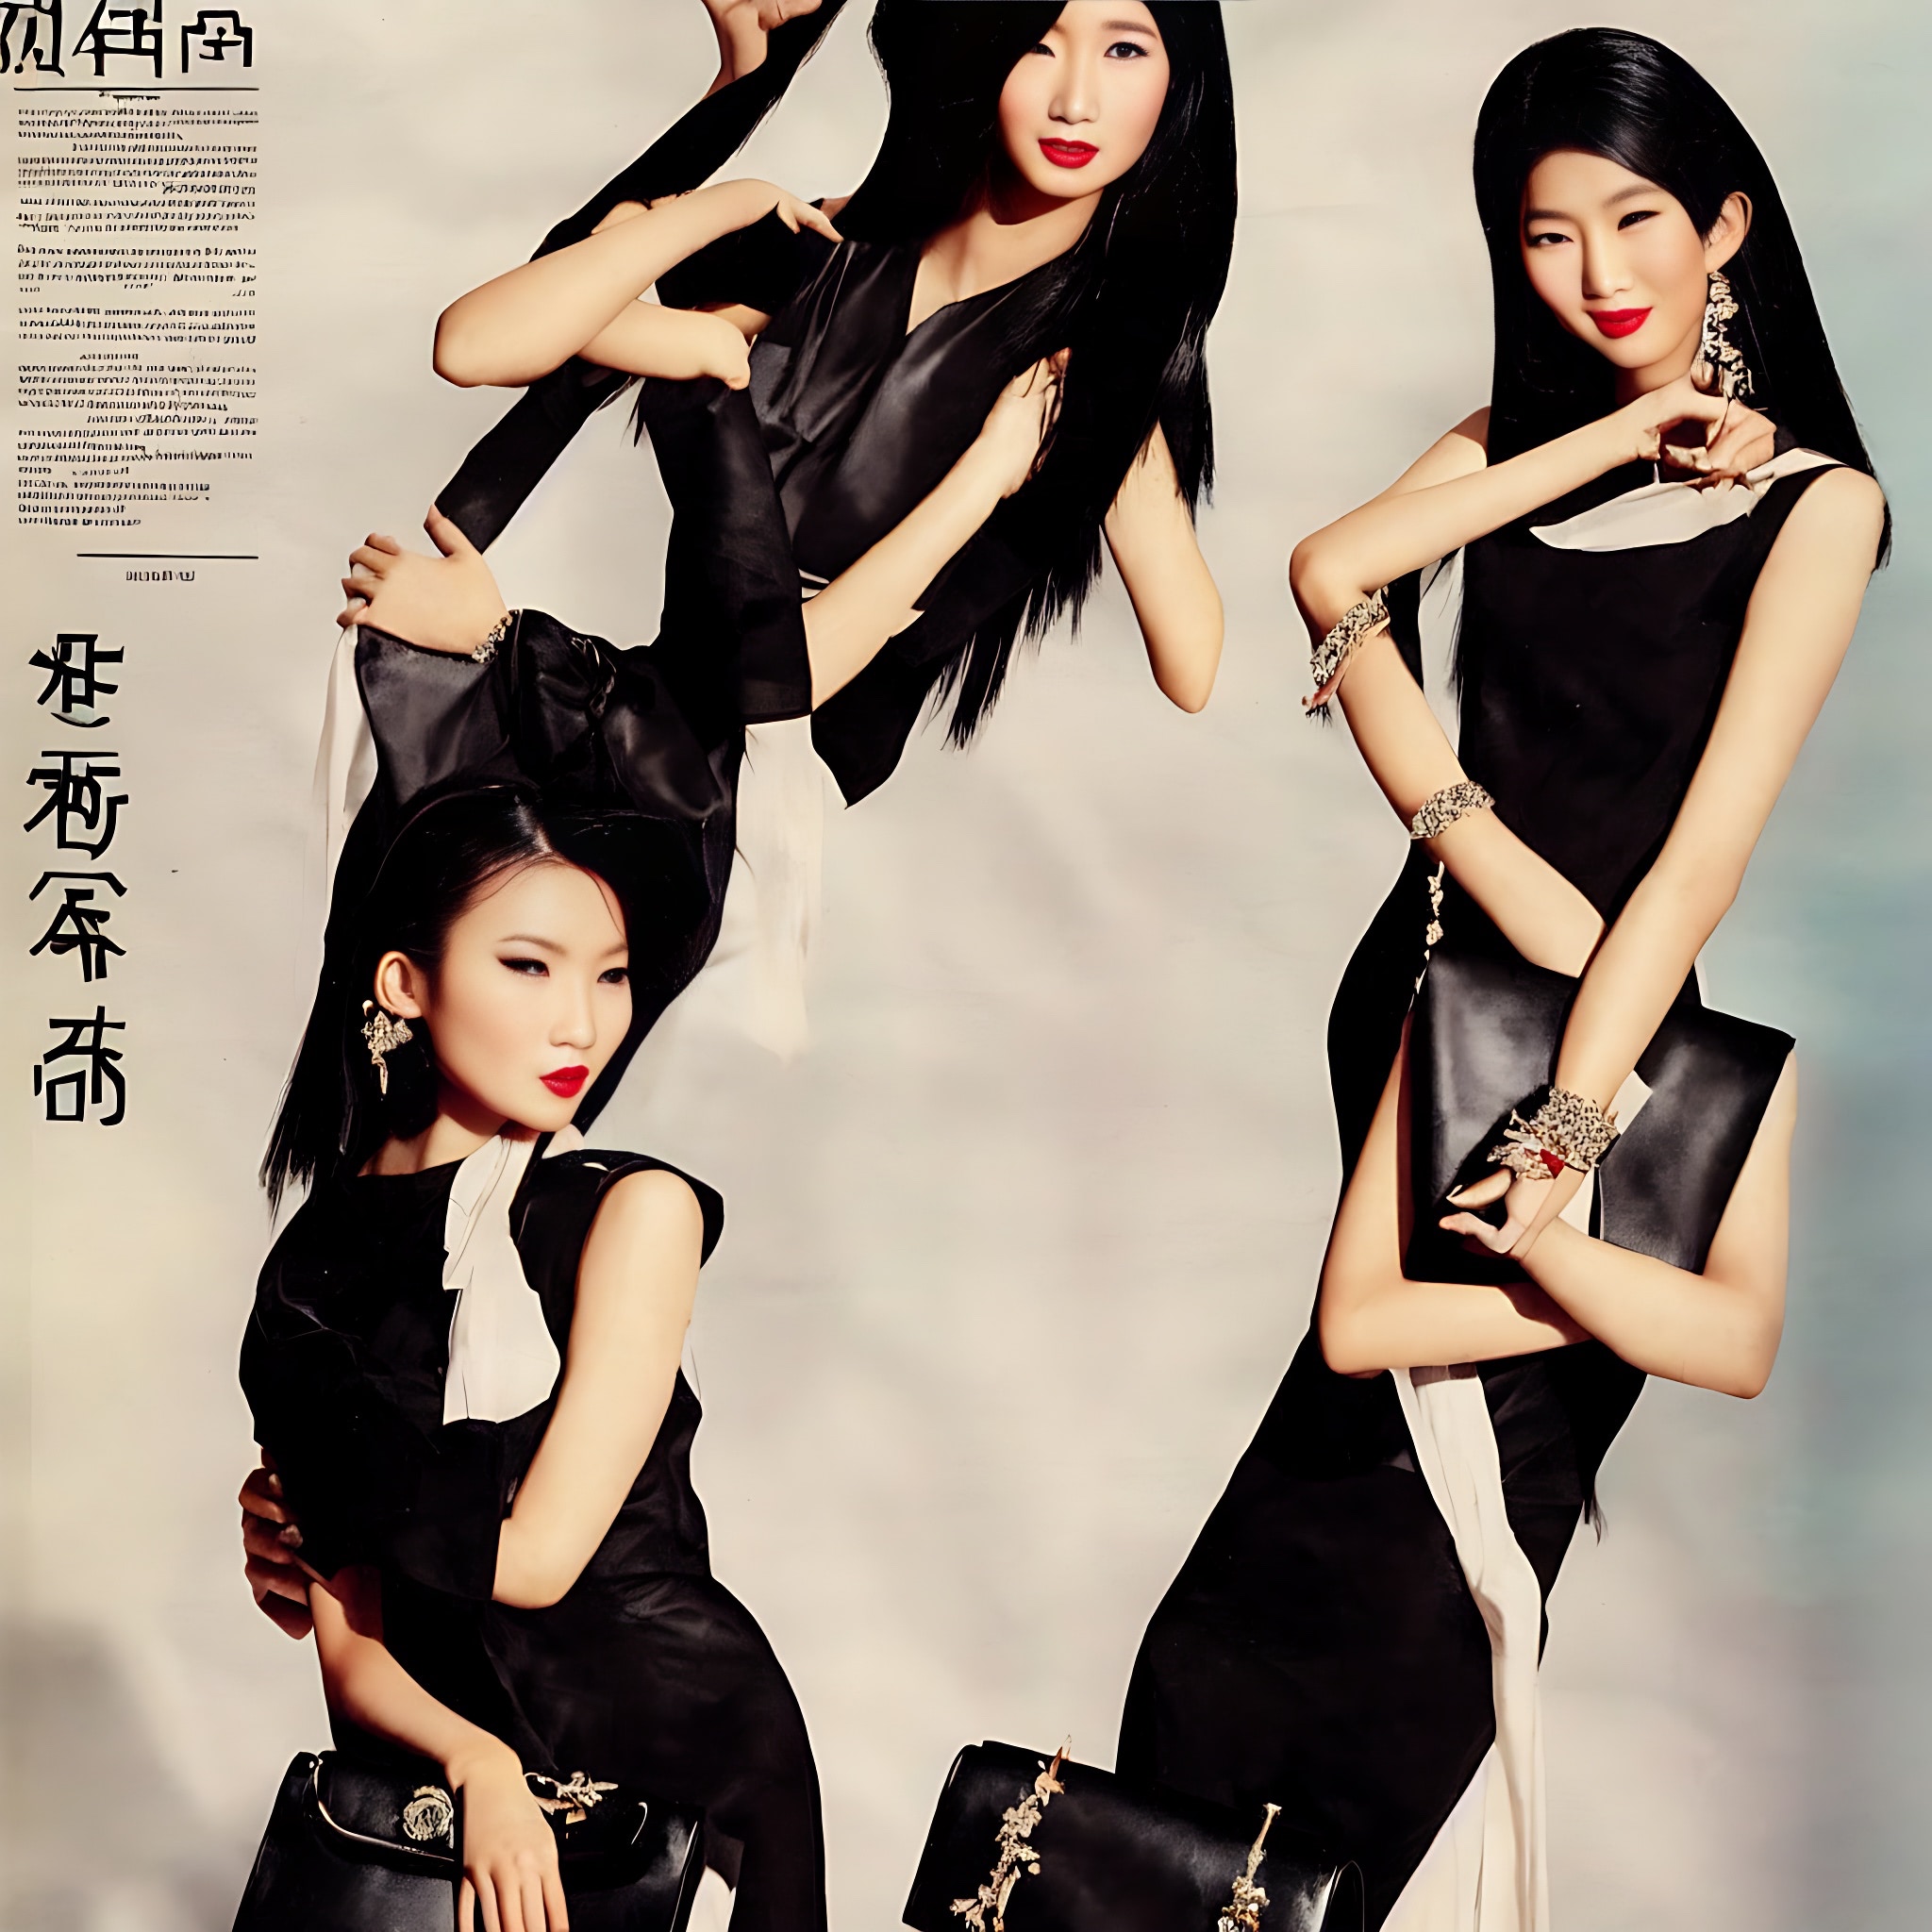 asian-fashion-advertisement-in-the-1980-1